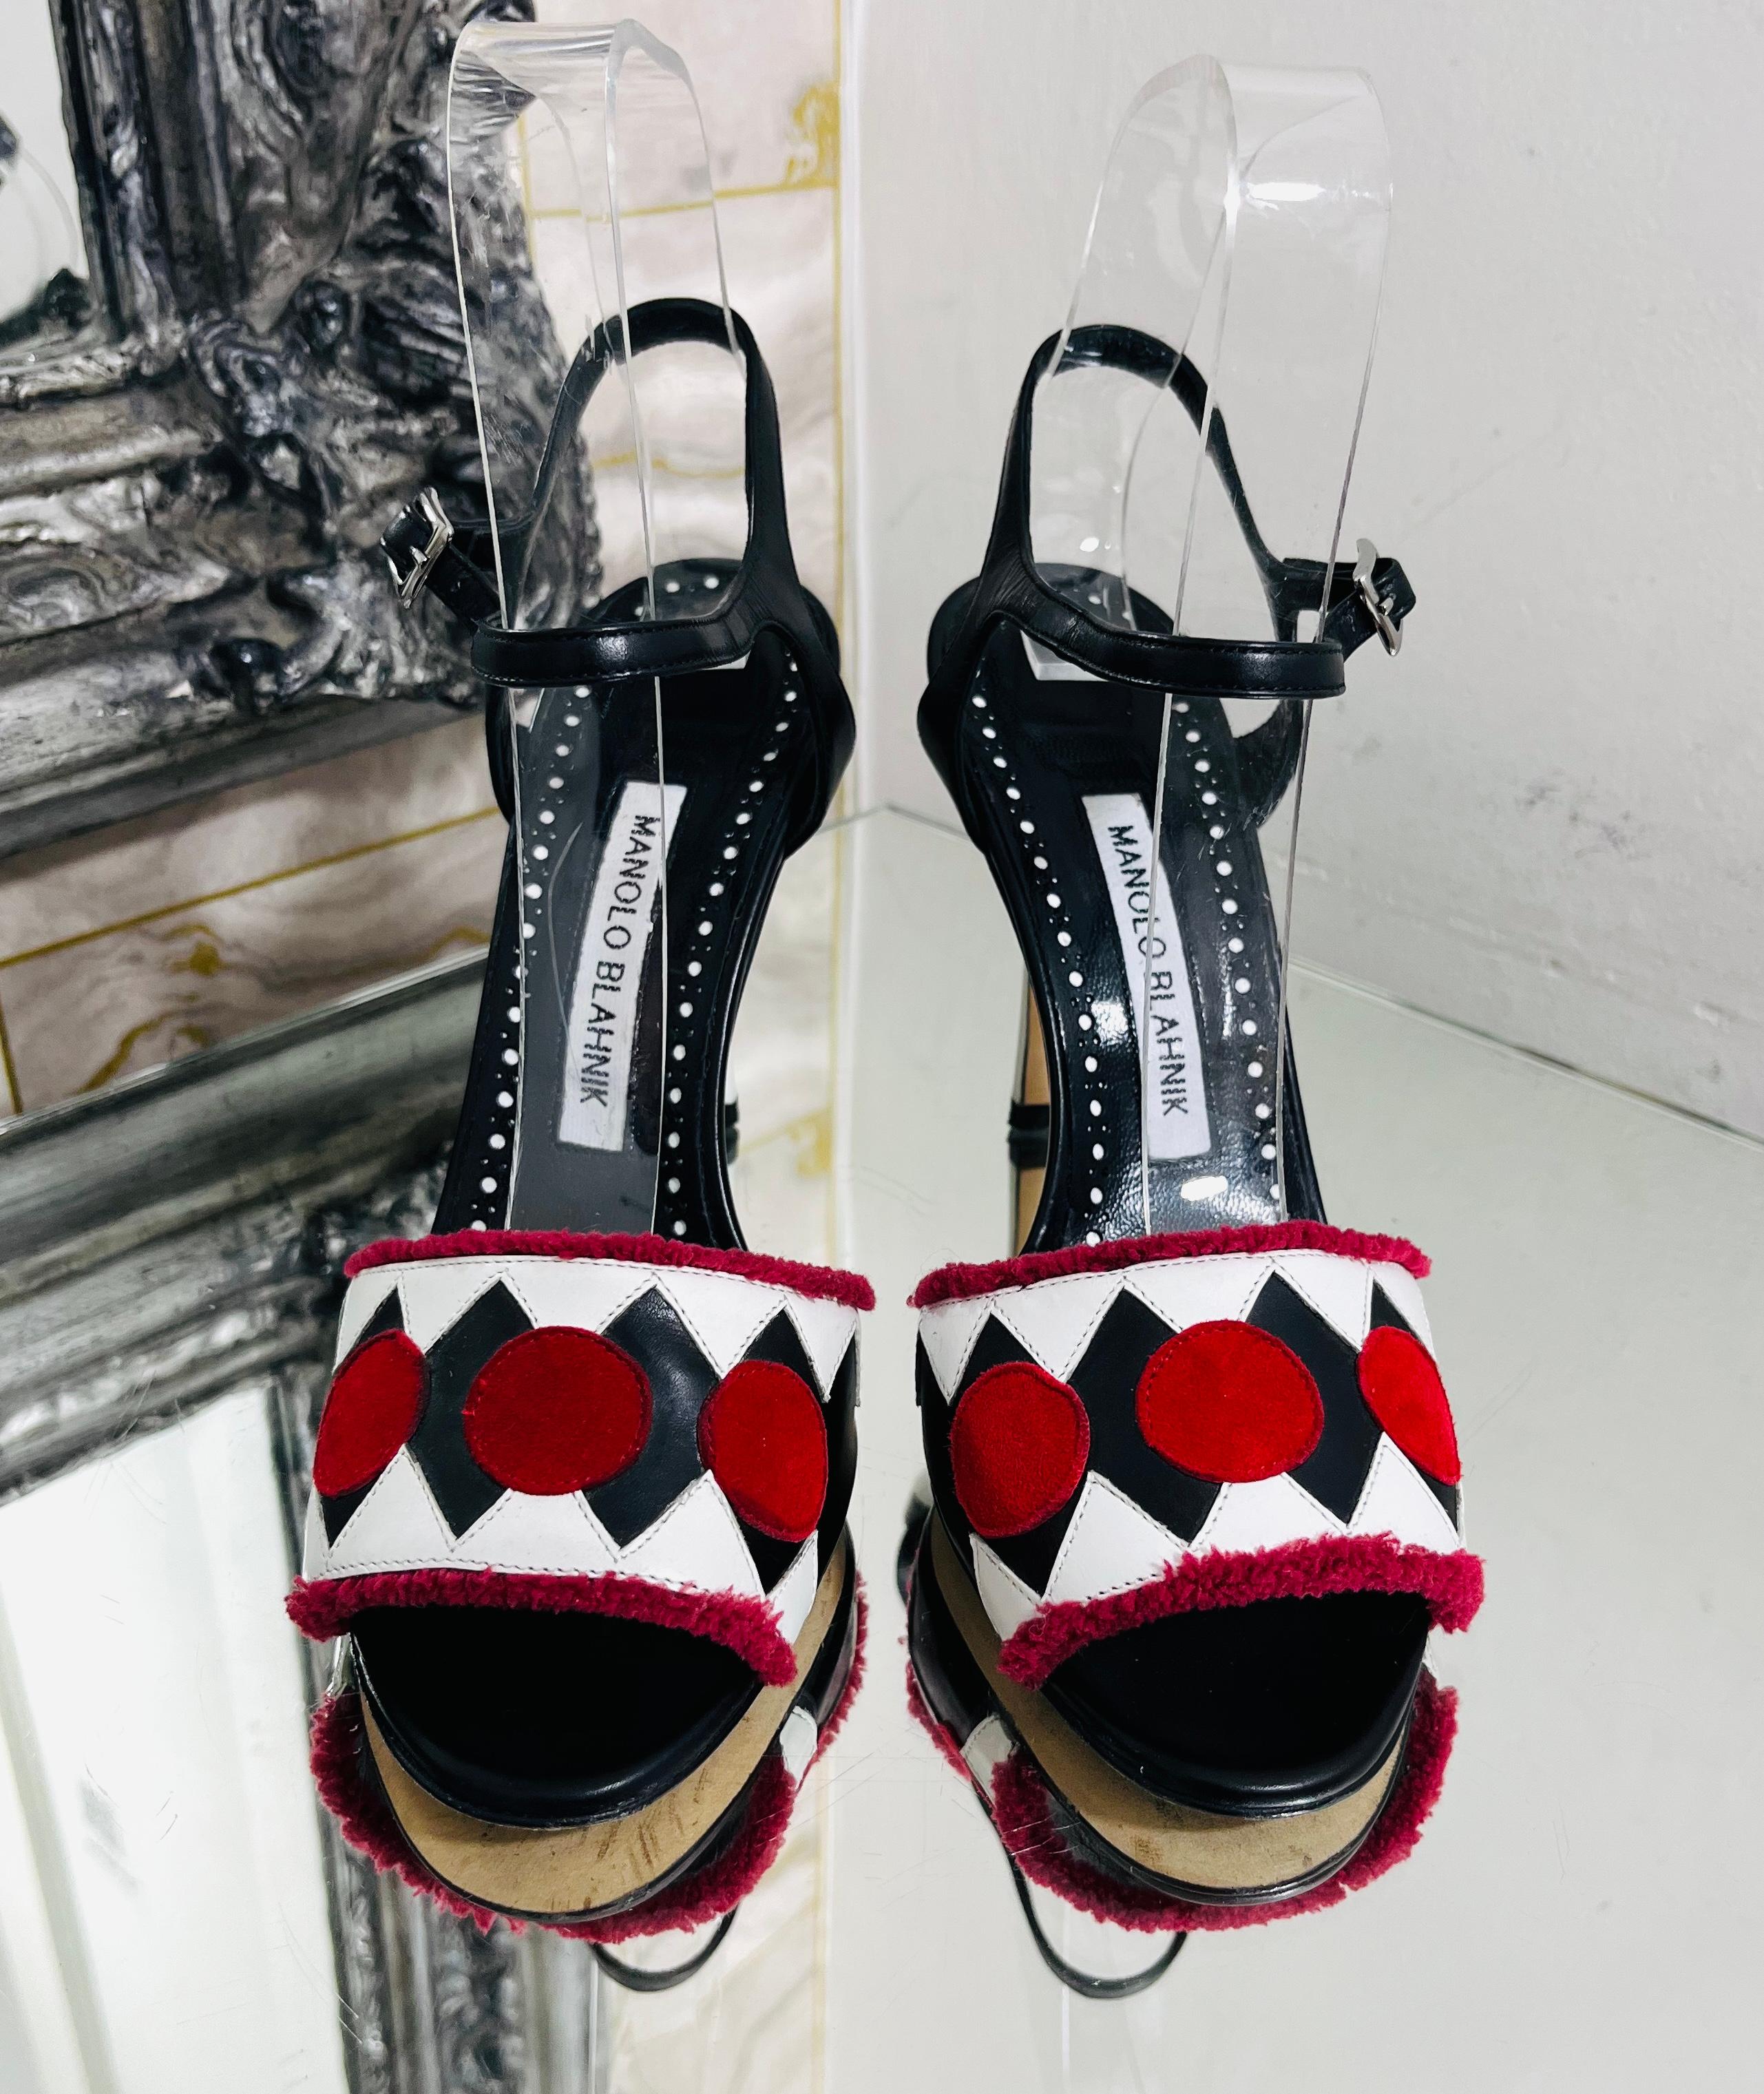 Manolo Blahnik Geometric Print Leather Sandals

Black , slingback heels styled with raw-trimmed strap designed with geometric black and white pattern and red, suede circles.

Featuring leather, buckled ankle strap and white heel.

Size –